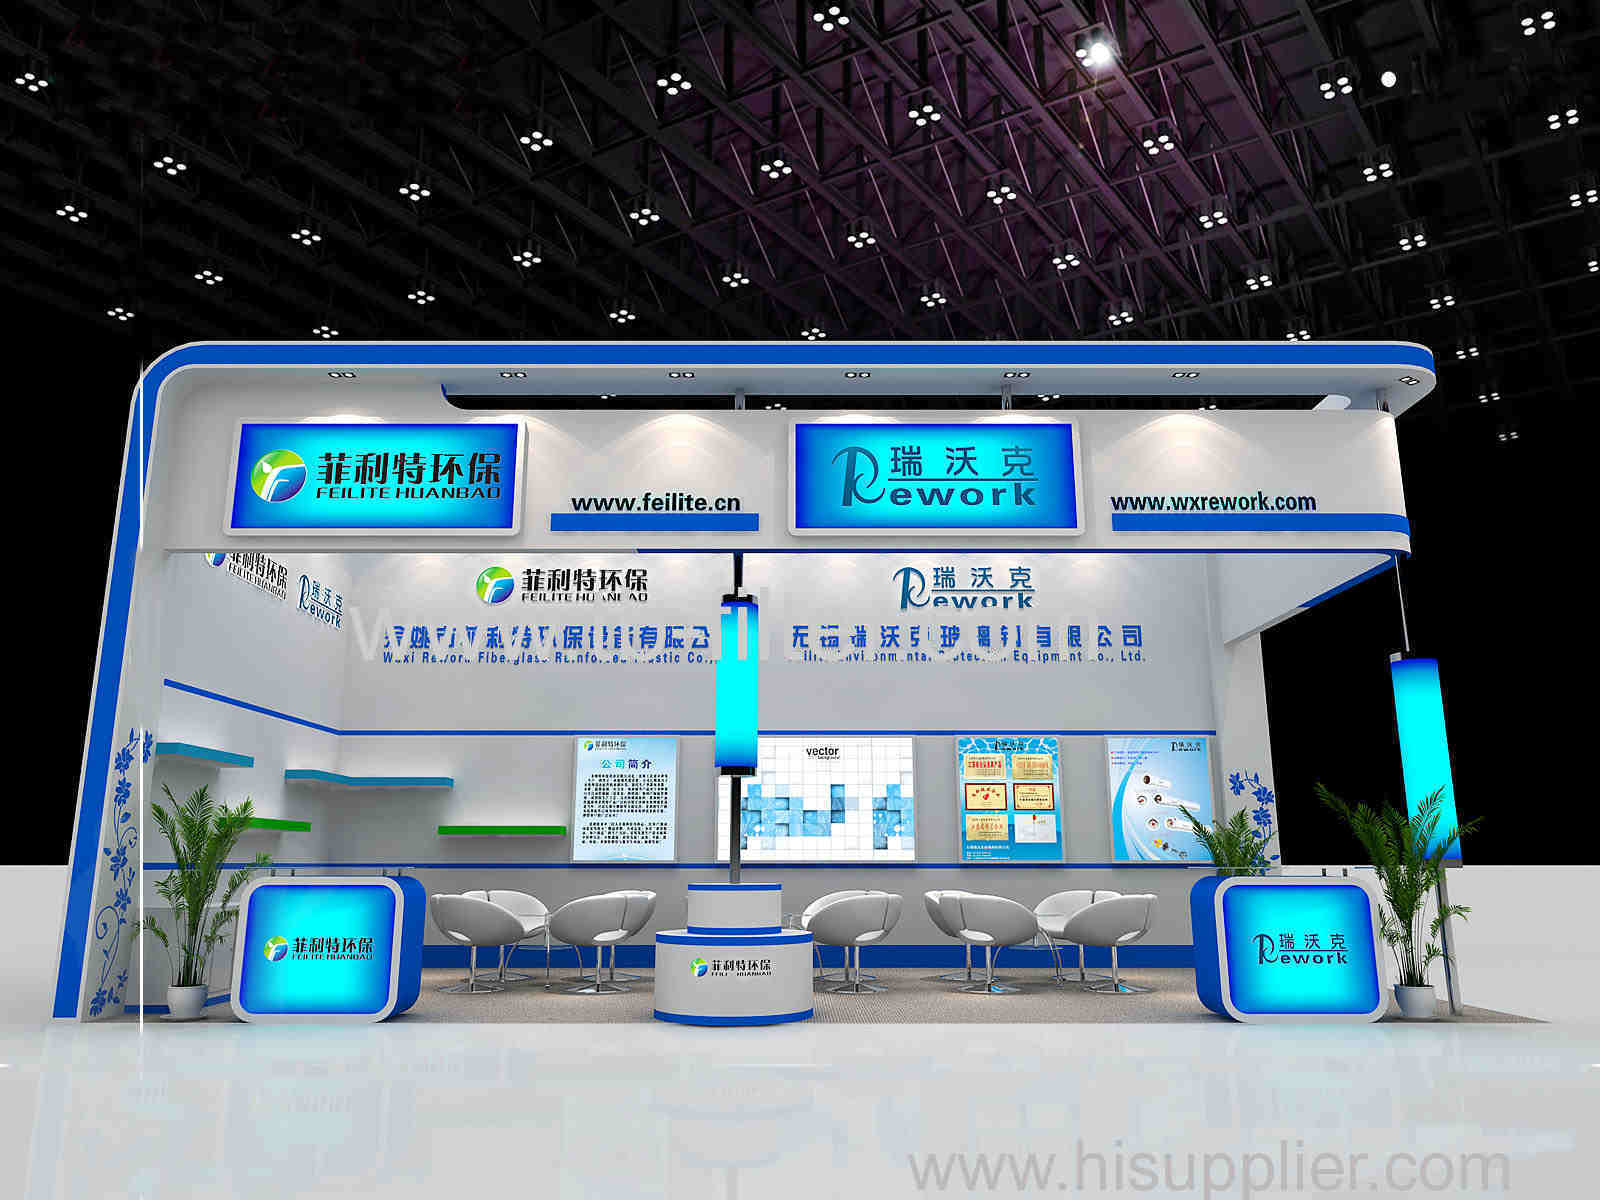 We will attend the AQUATECH CHINA 2014